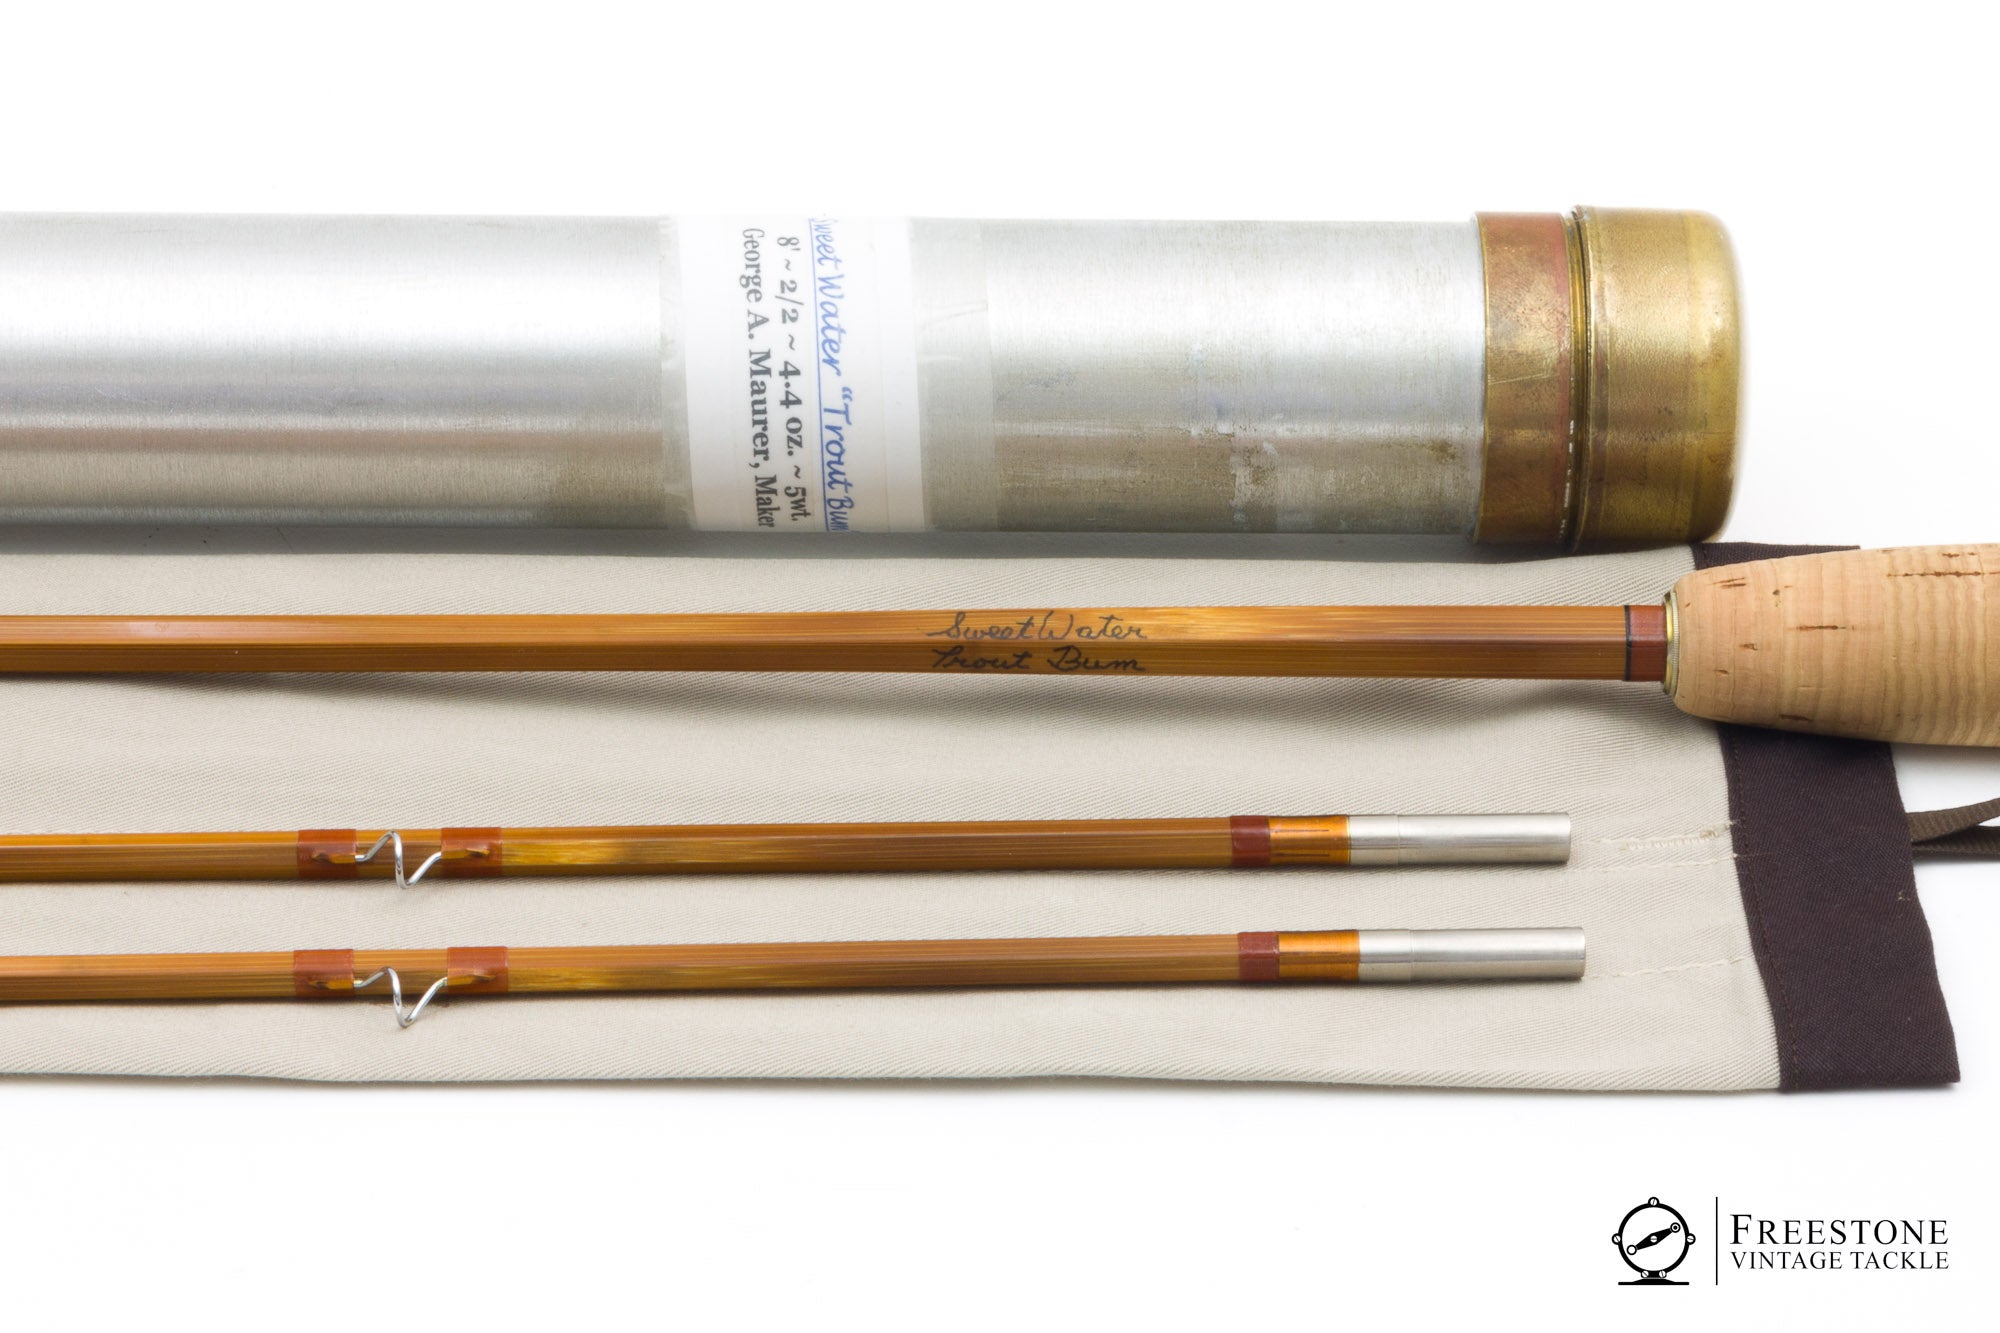 Sweetwater rocky Mountain Trout Bum Three Piece Fly Fishing Rod